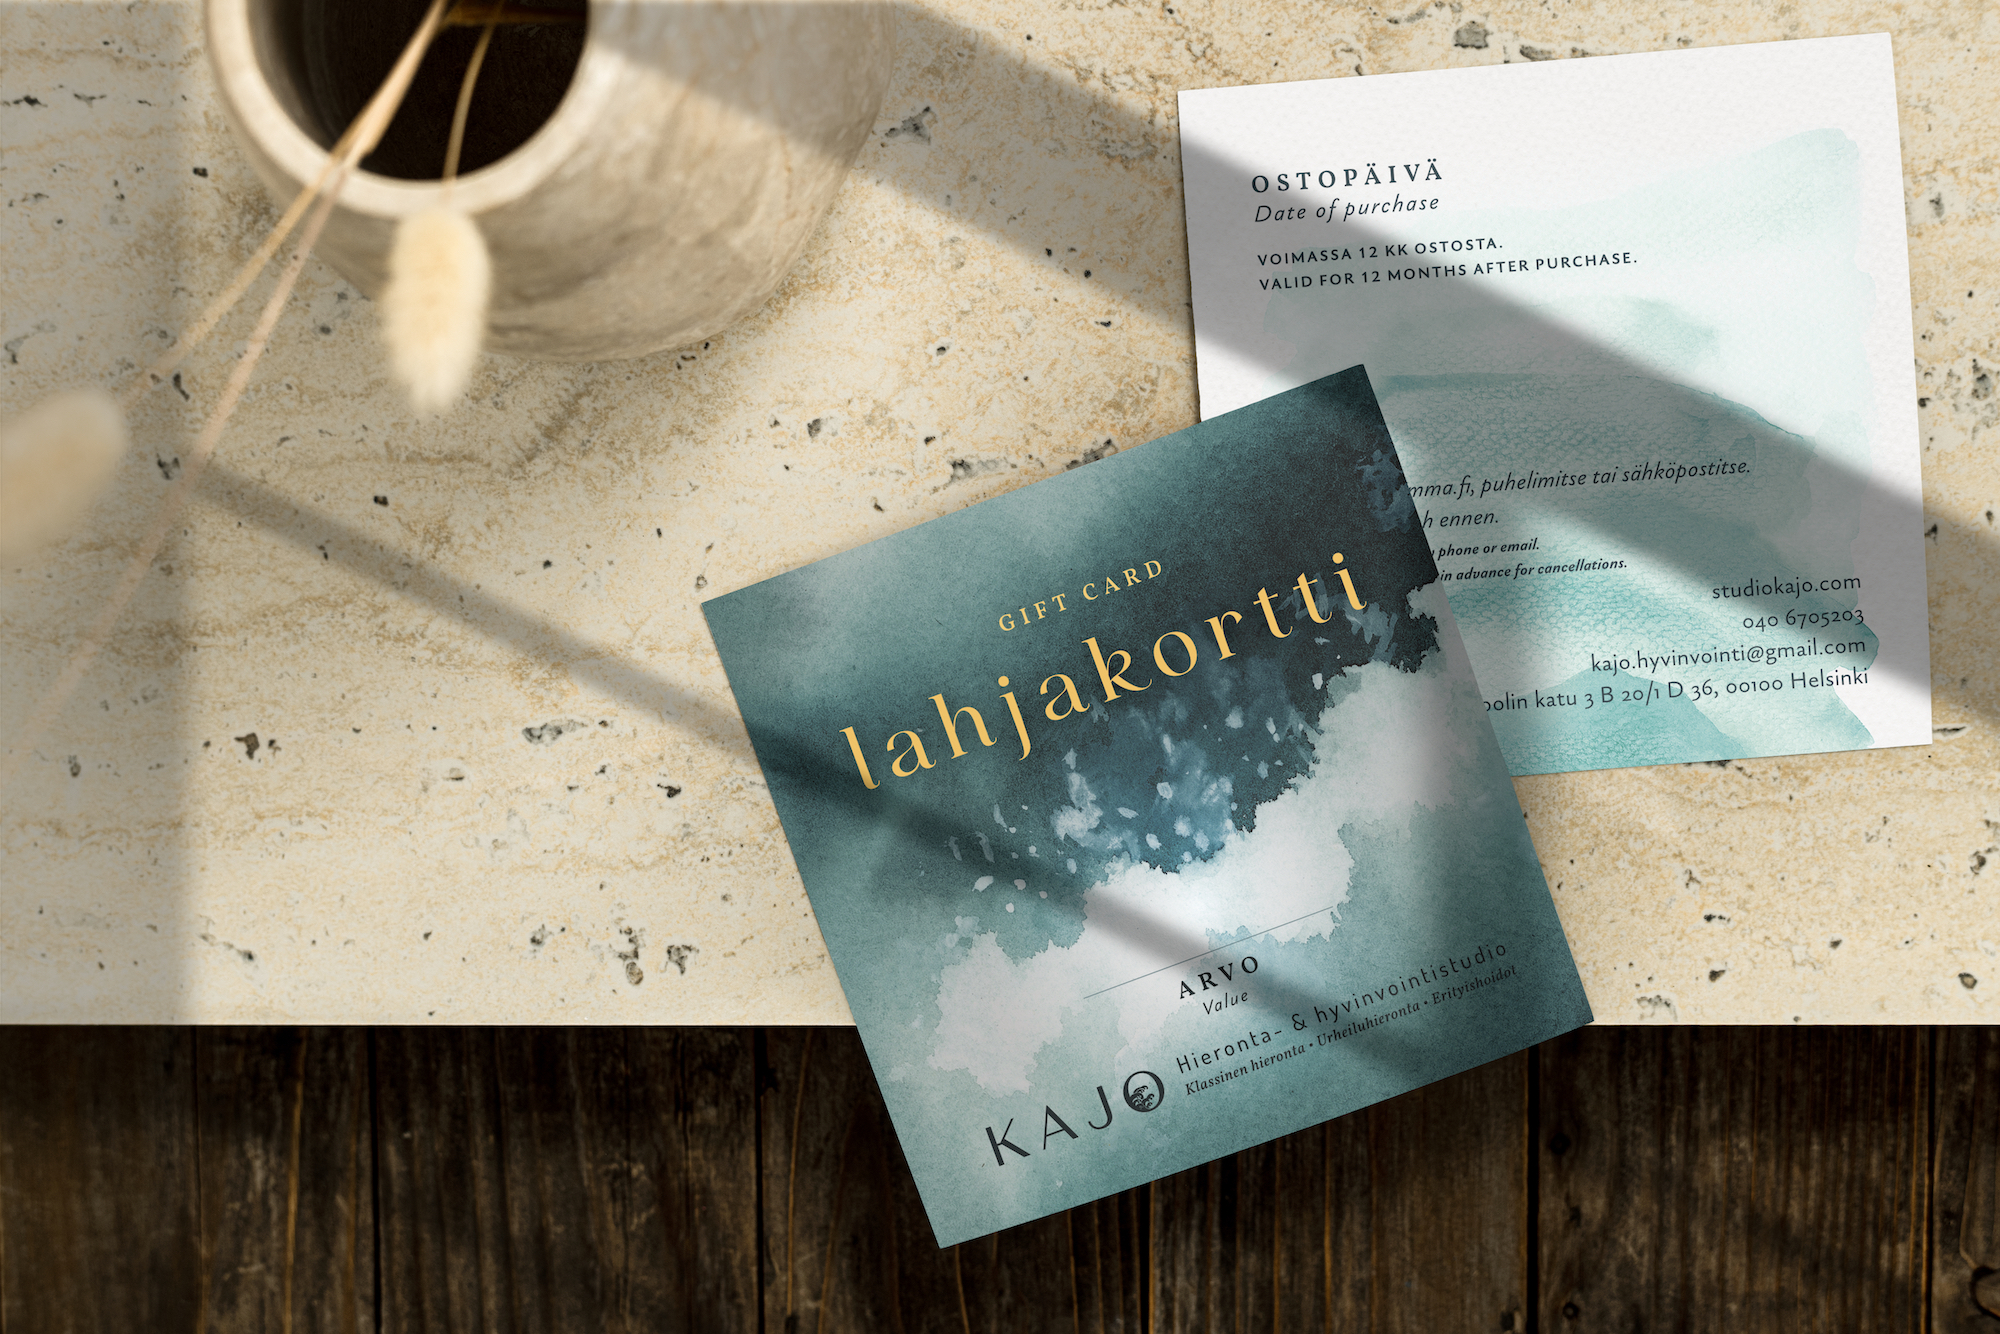 Mockups of the front and back of a large square gift certificate. The front has the 'Kajo' logo on a blue and white painted background of ocean waves. The reverse side is on a watercolor background of white and light aqua.